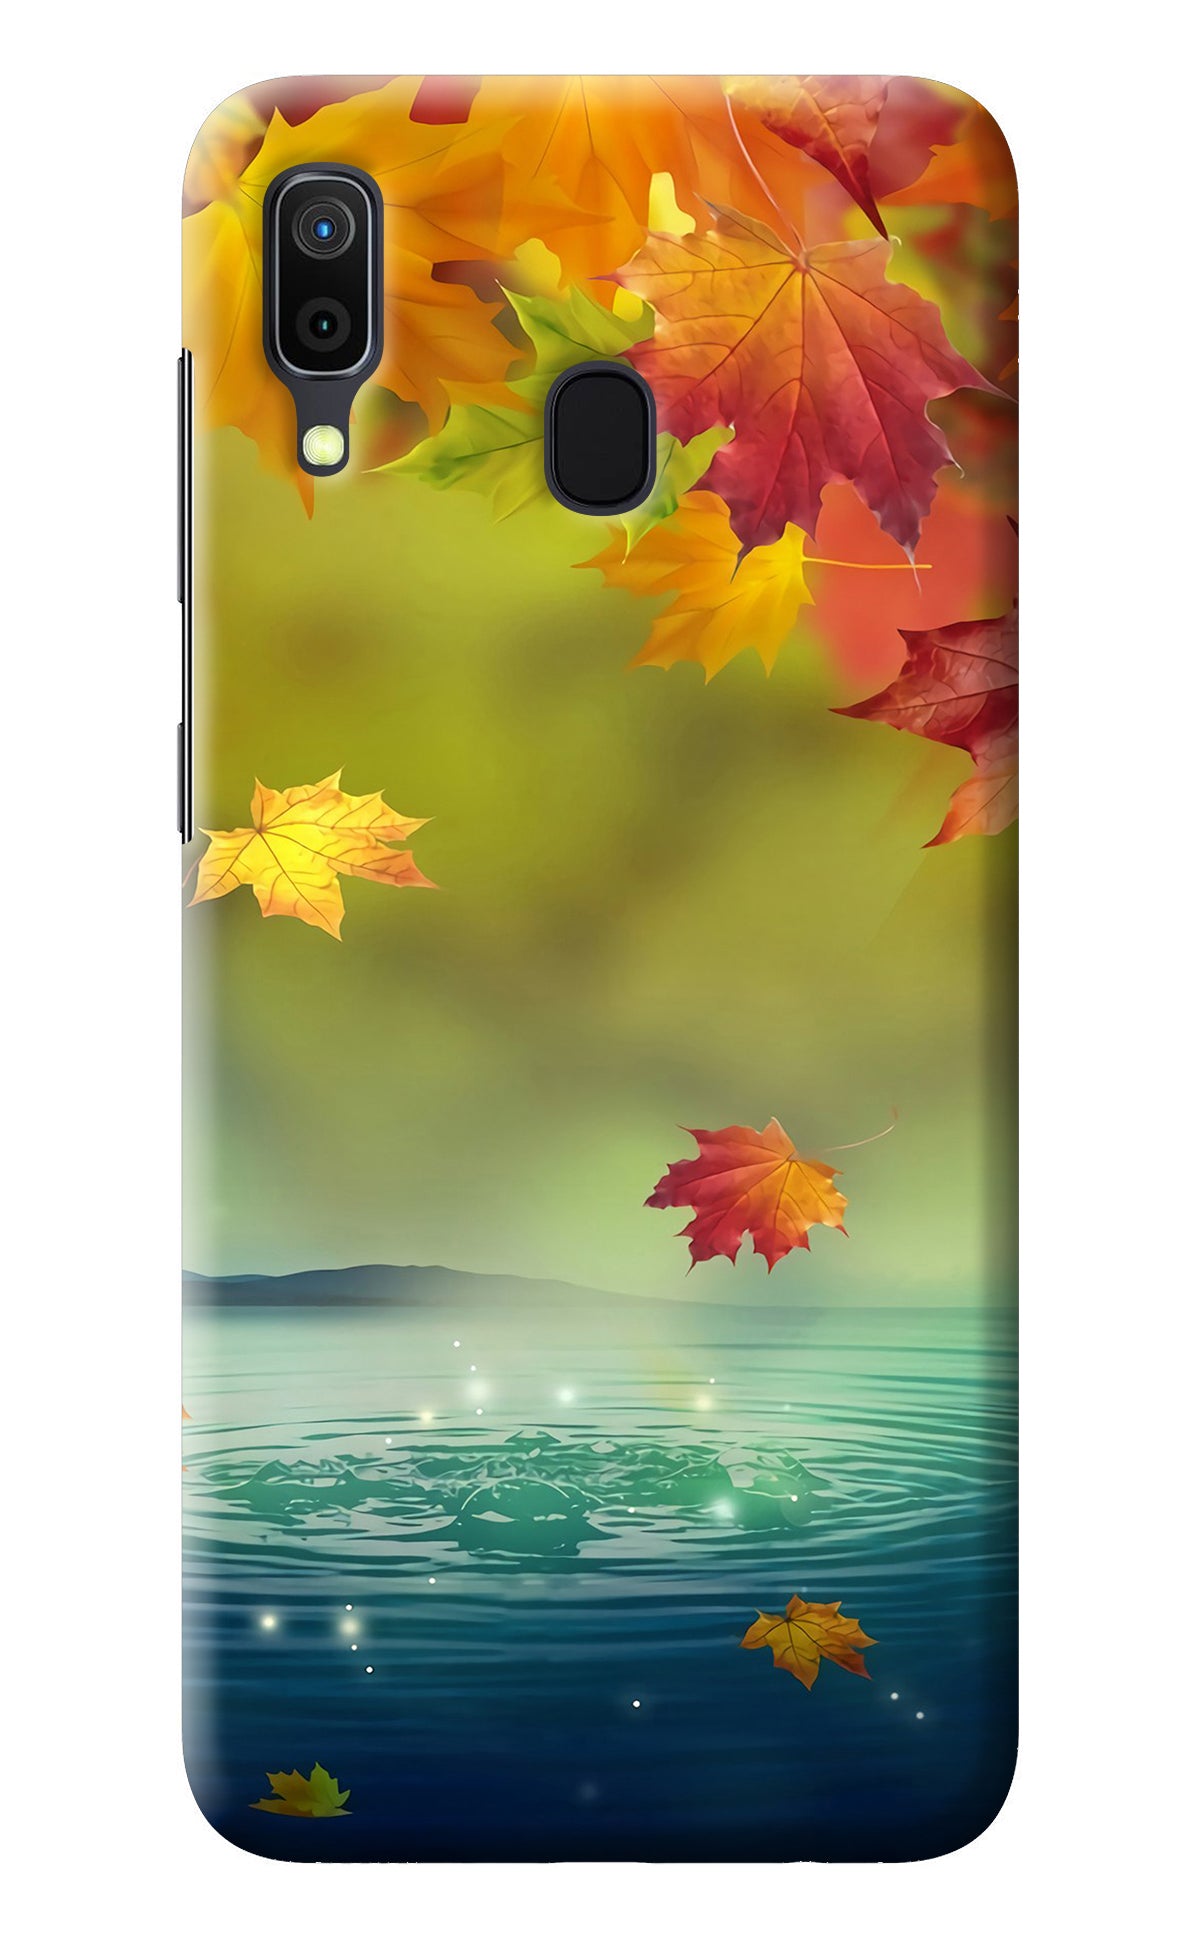 Flowers Samsung A30 Back Cover